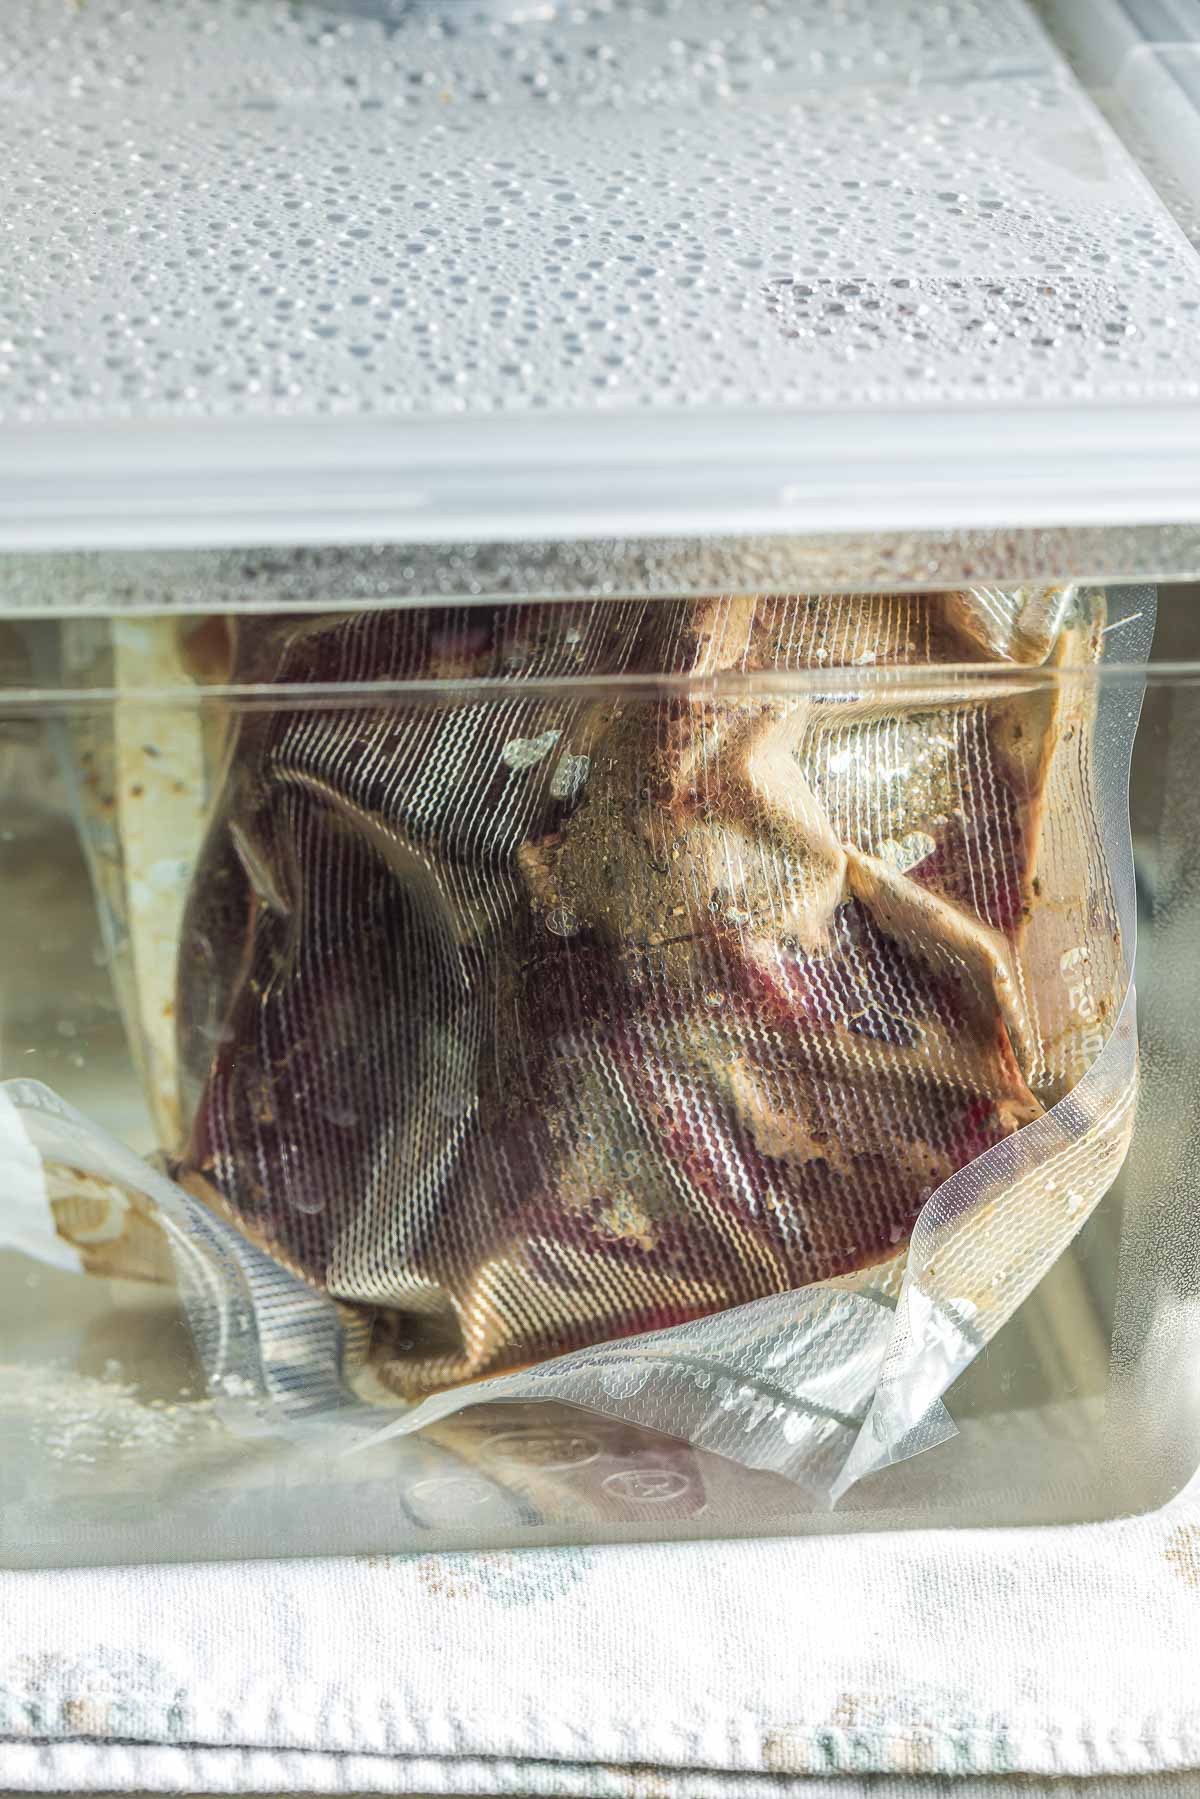 a beef roast in a bag cooking in a water bath